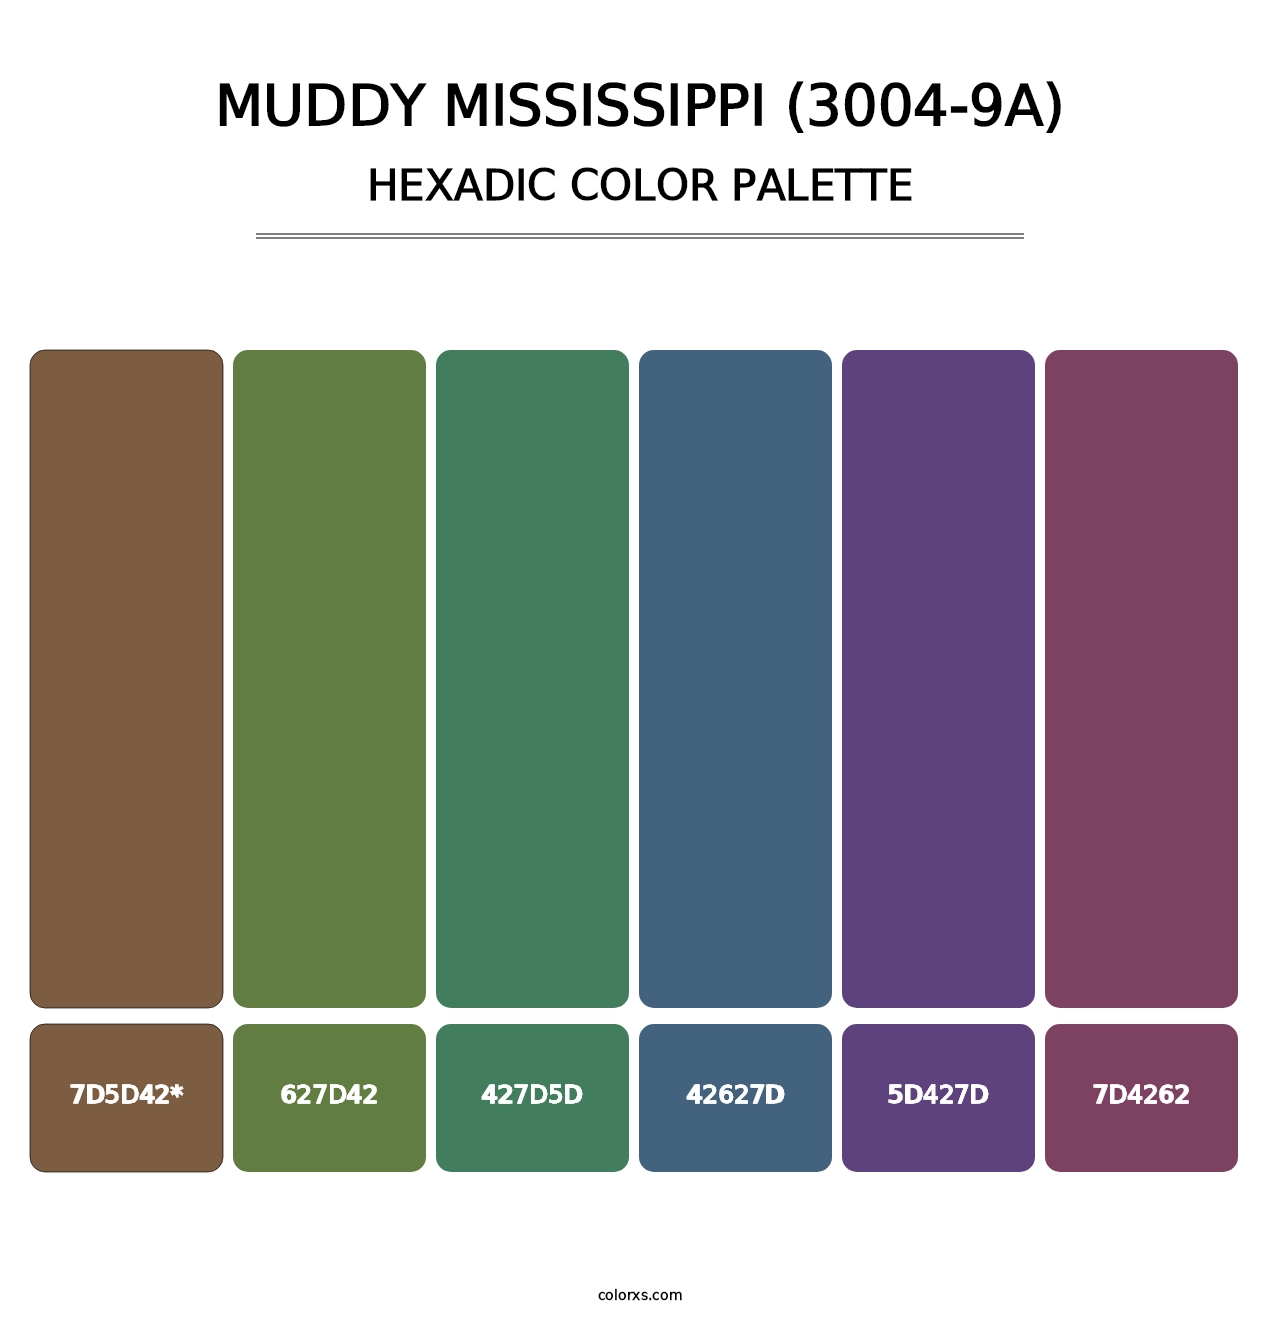 Muddy Mississippi (3004-9A) - Hexadic Color Palette